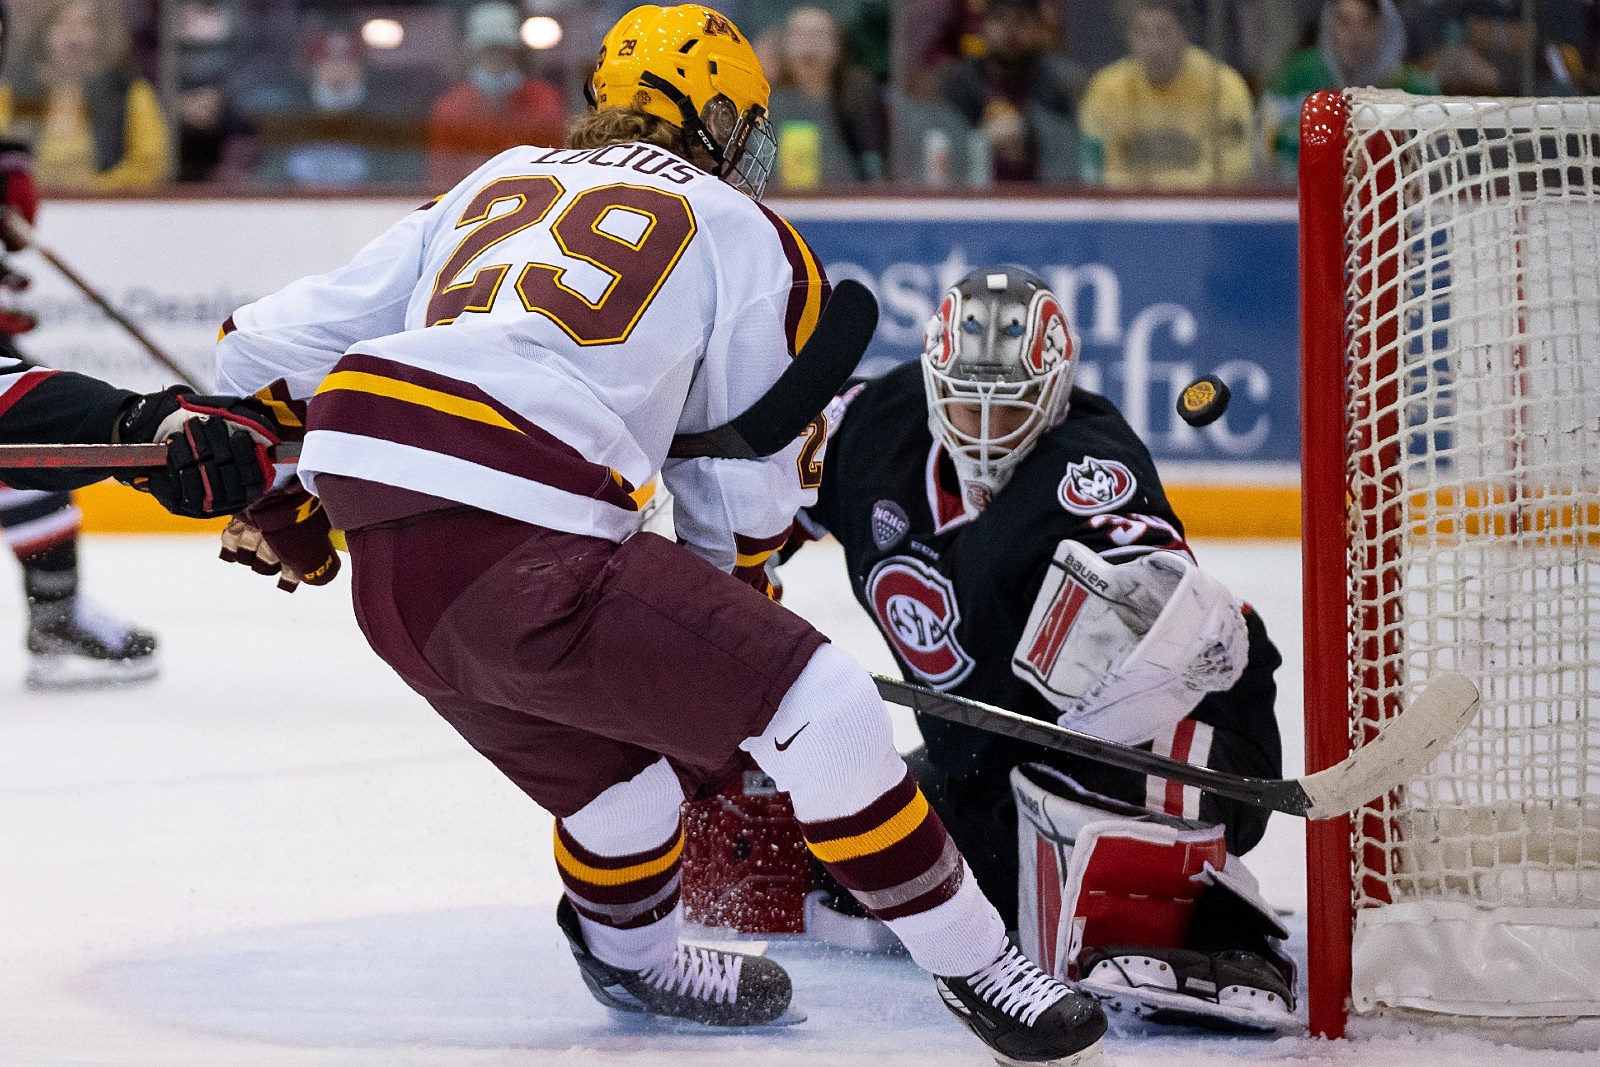 Top 10 of 2013: #2 St Cloud State Hockey Reaches Frozen Four